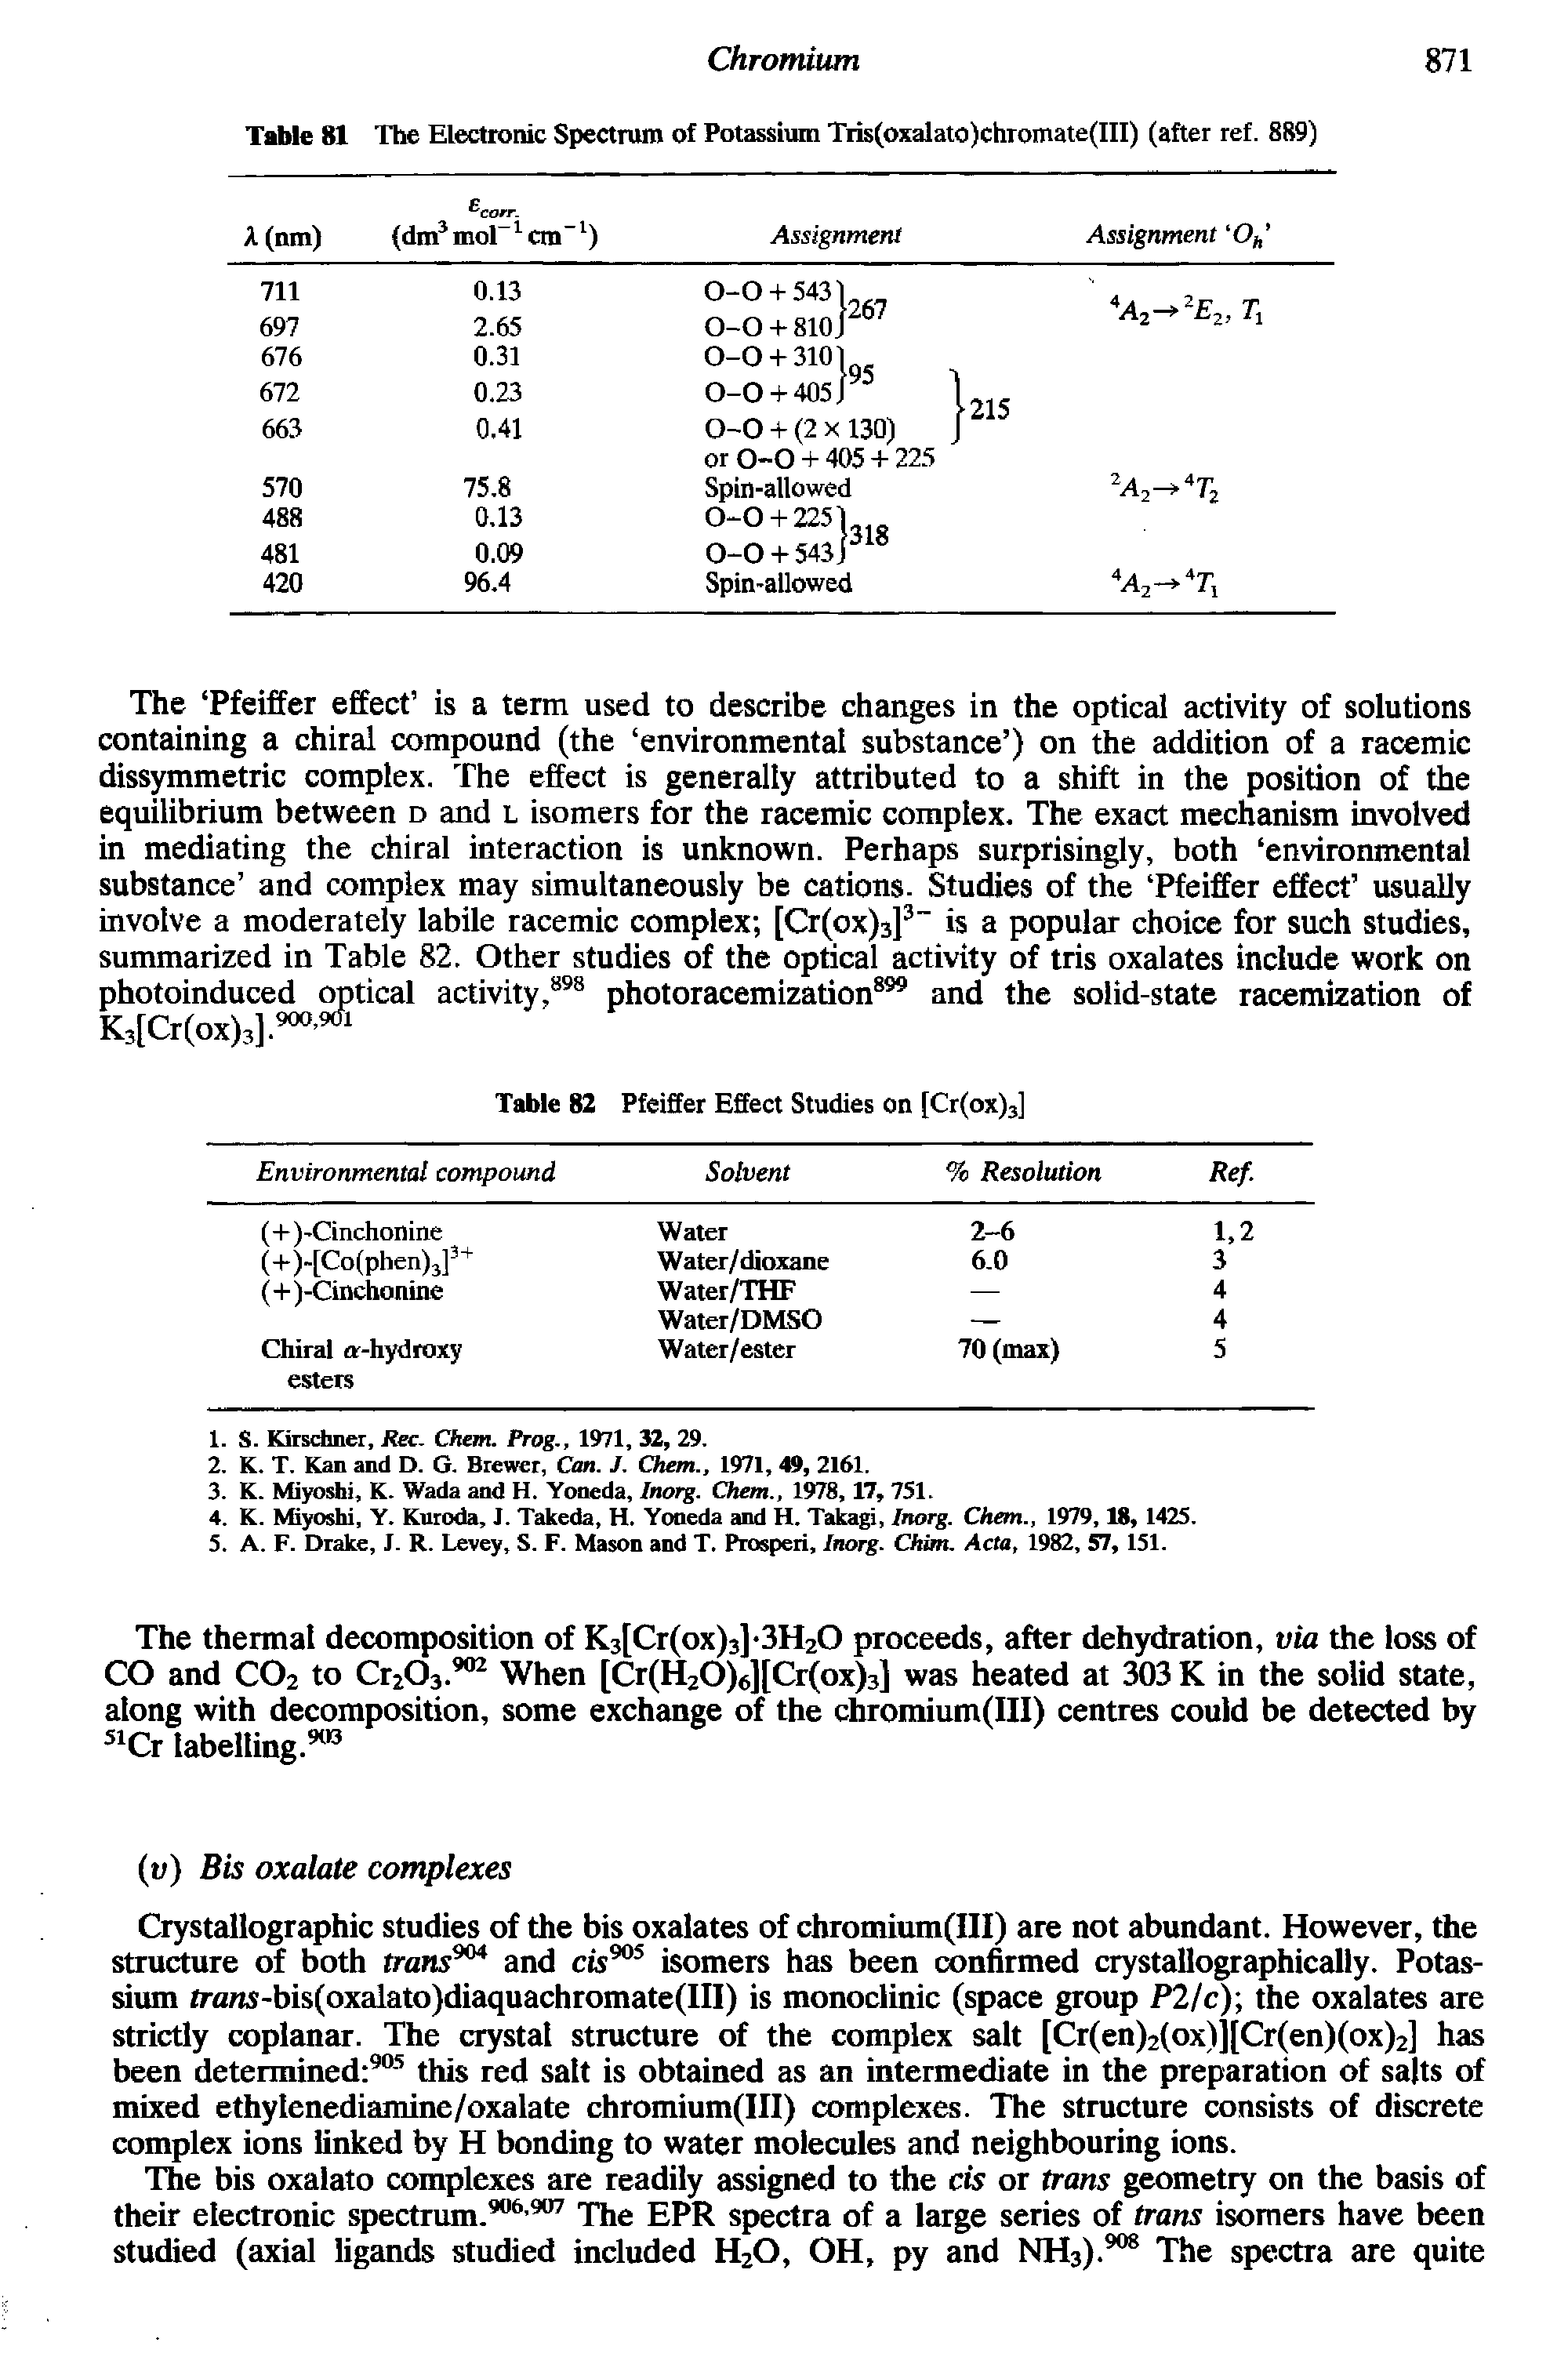 Table 81 The Electronic Spectrum of Potassium Tris(oxalato)chromate(III) (after ref. 889)...